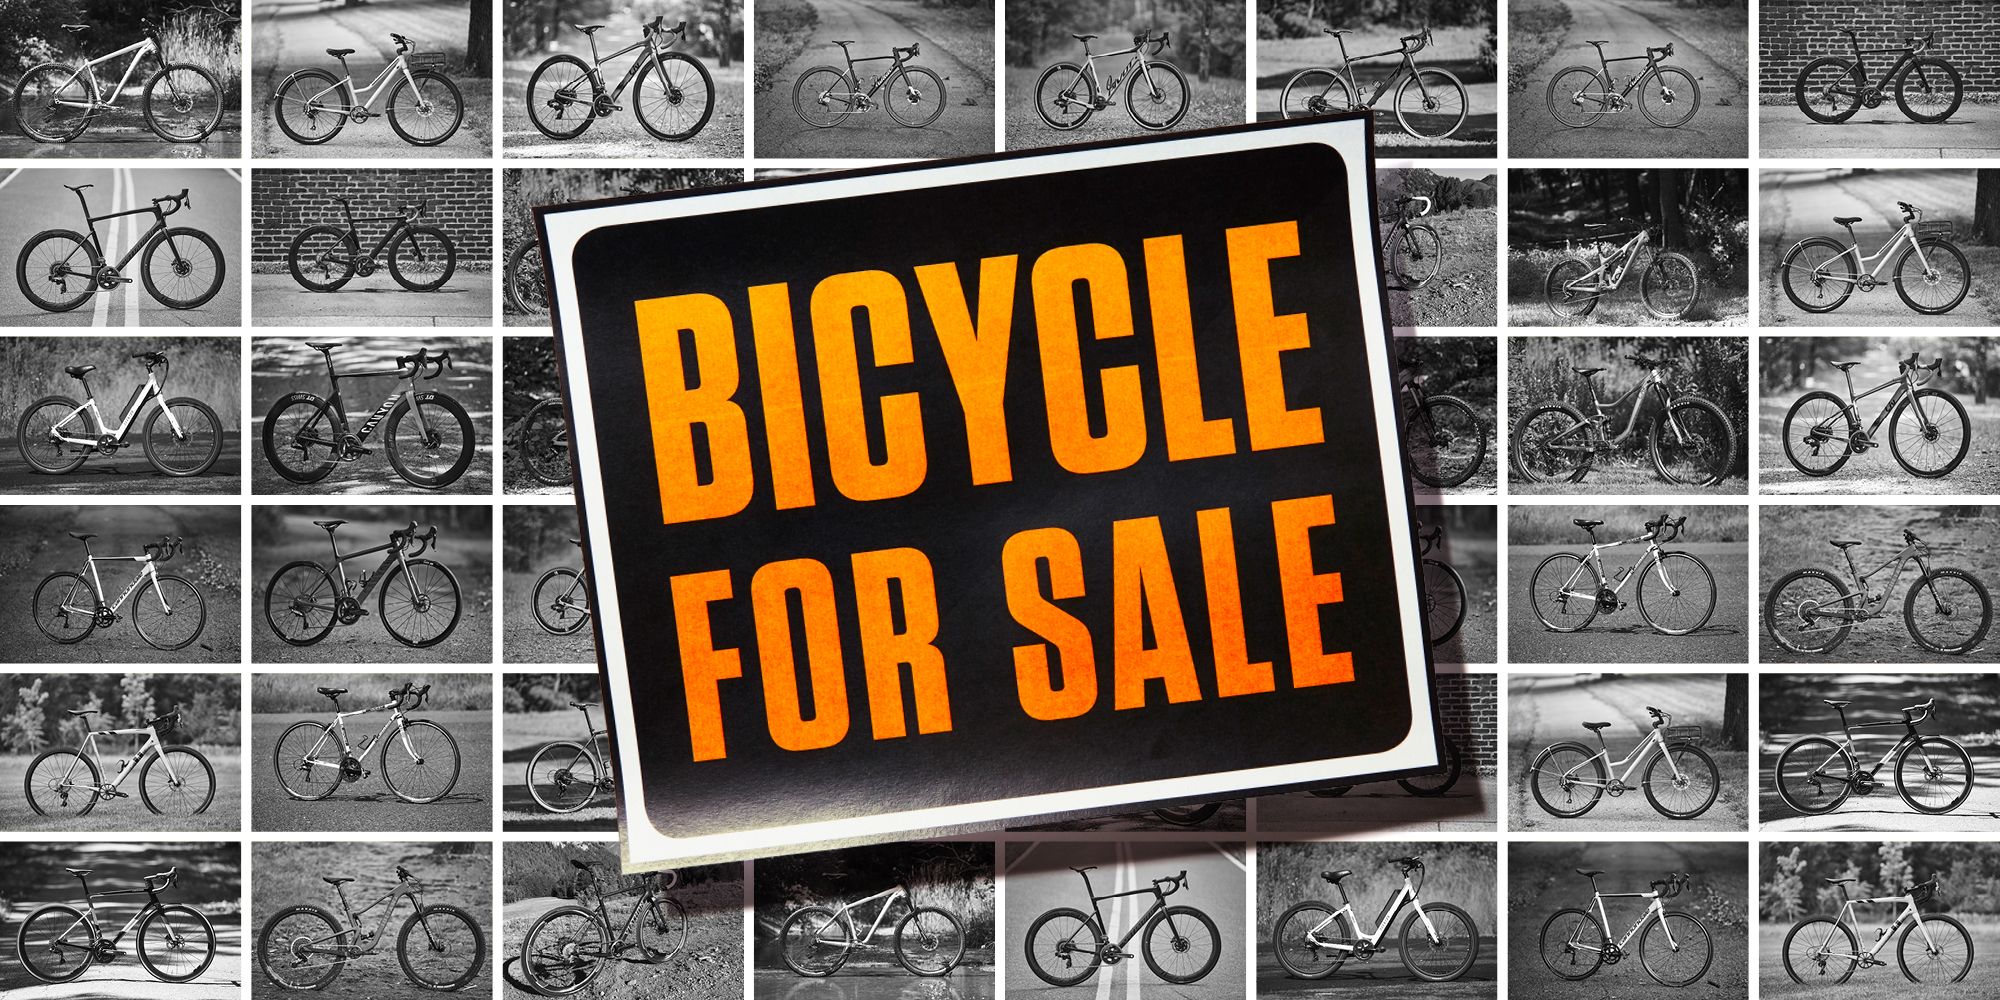 second hand racing bikes for sale